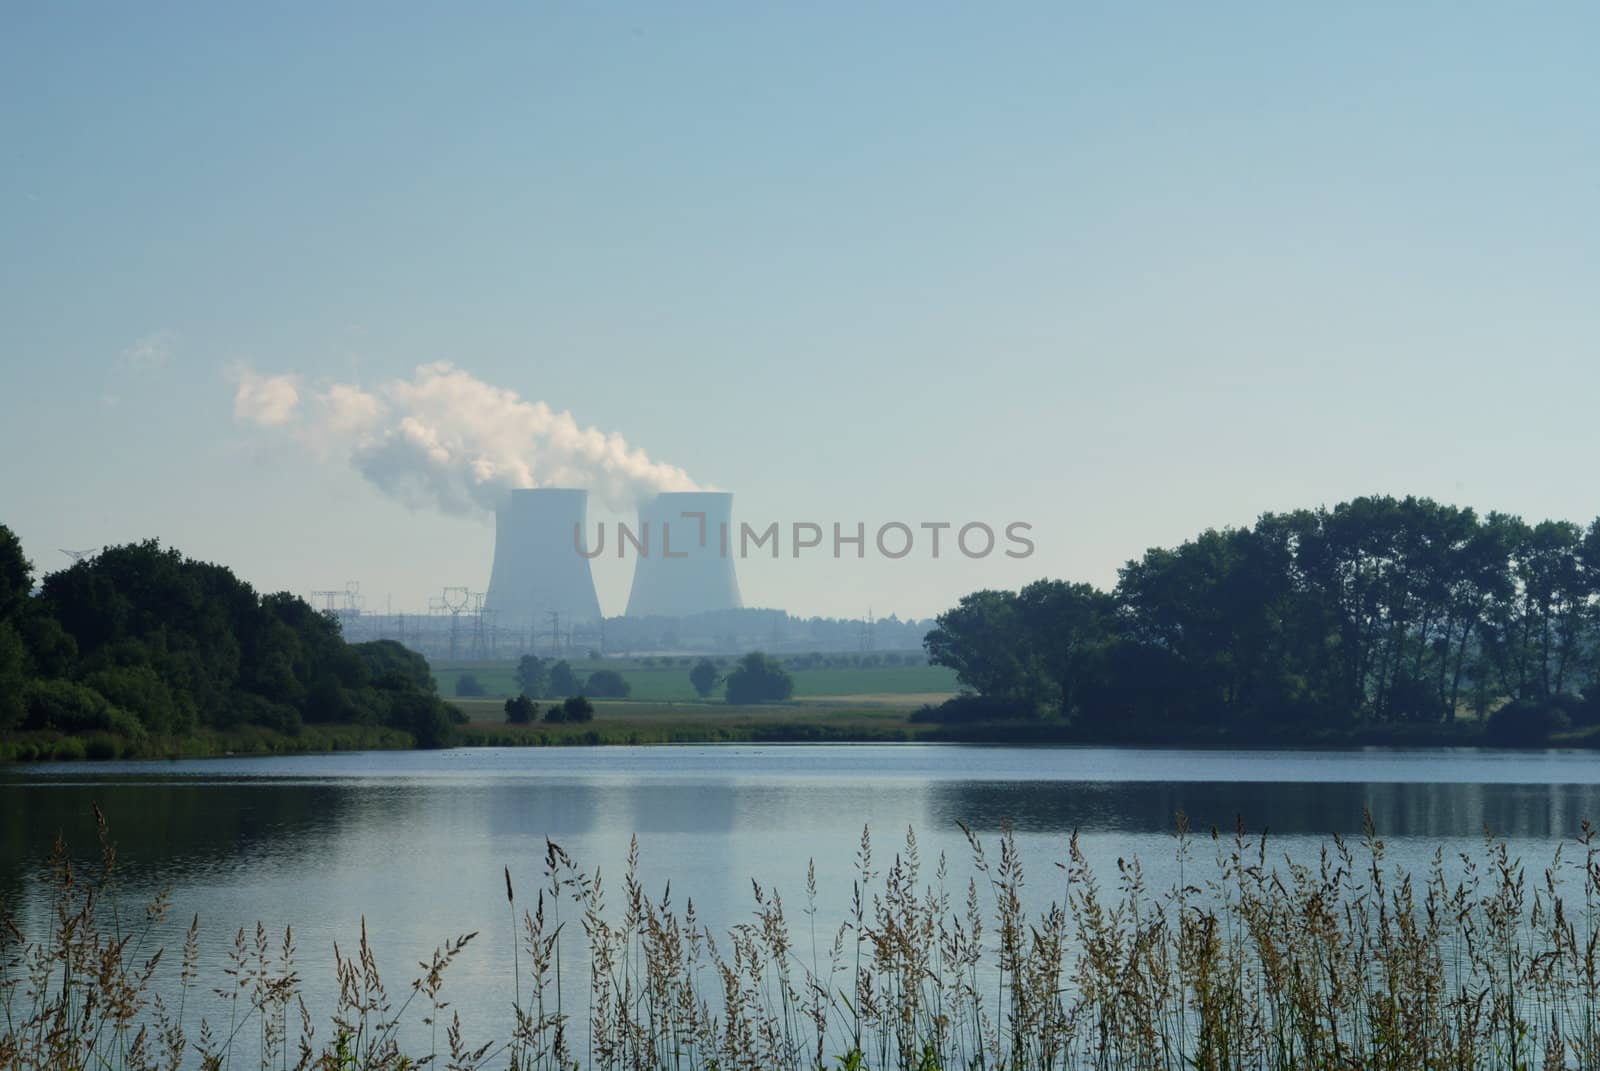 Nuclear power plant towers, a symbol of energy solution?